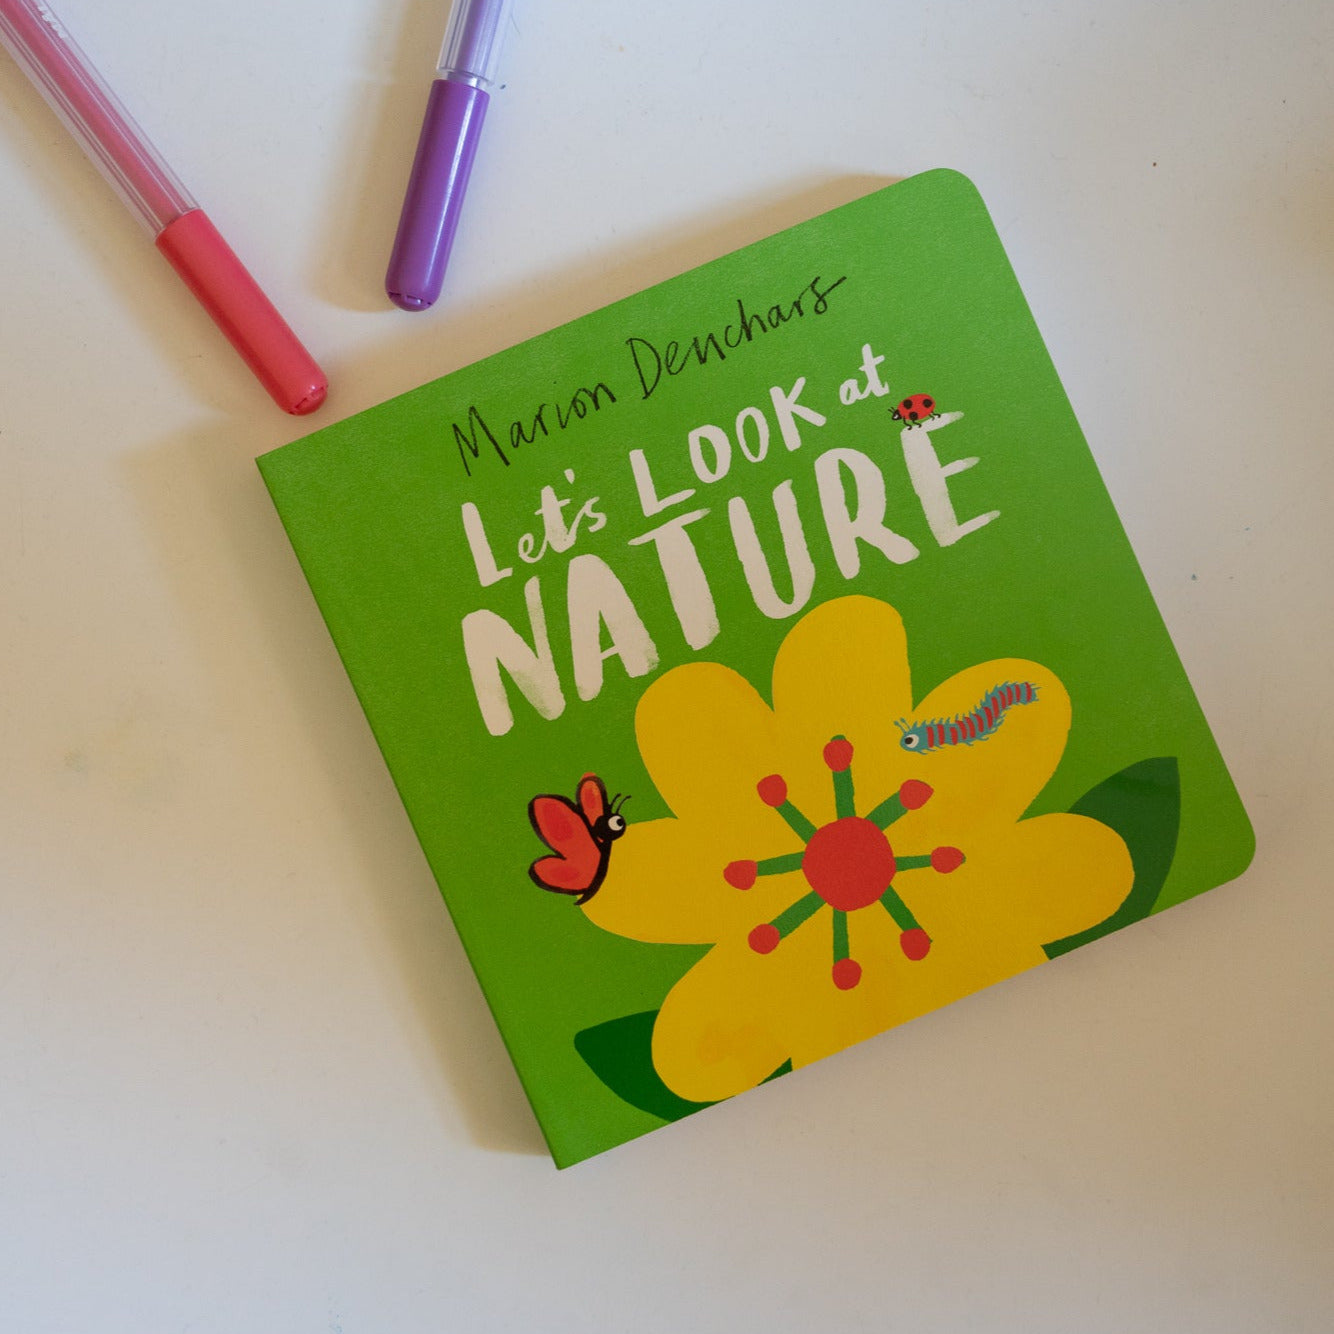 Let's Look At Nature, Children's Board Book